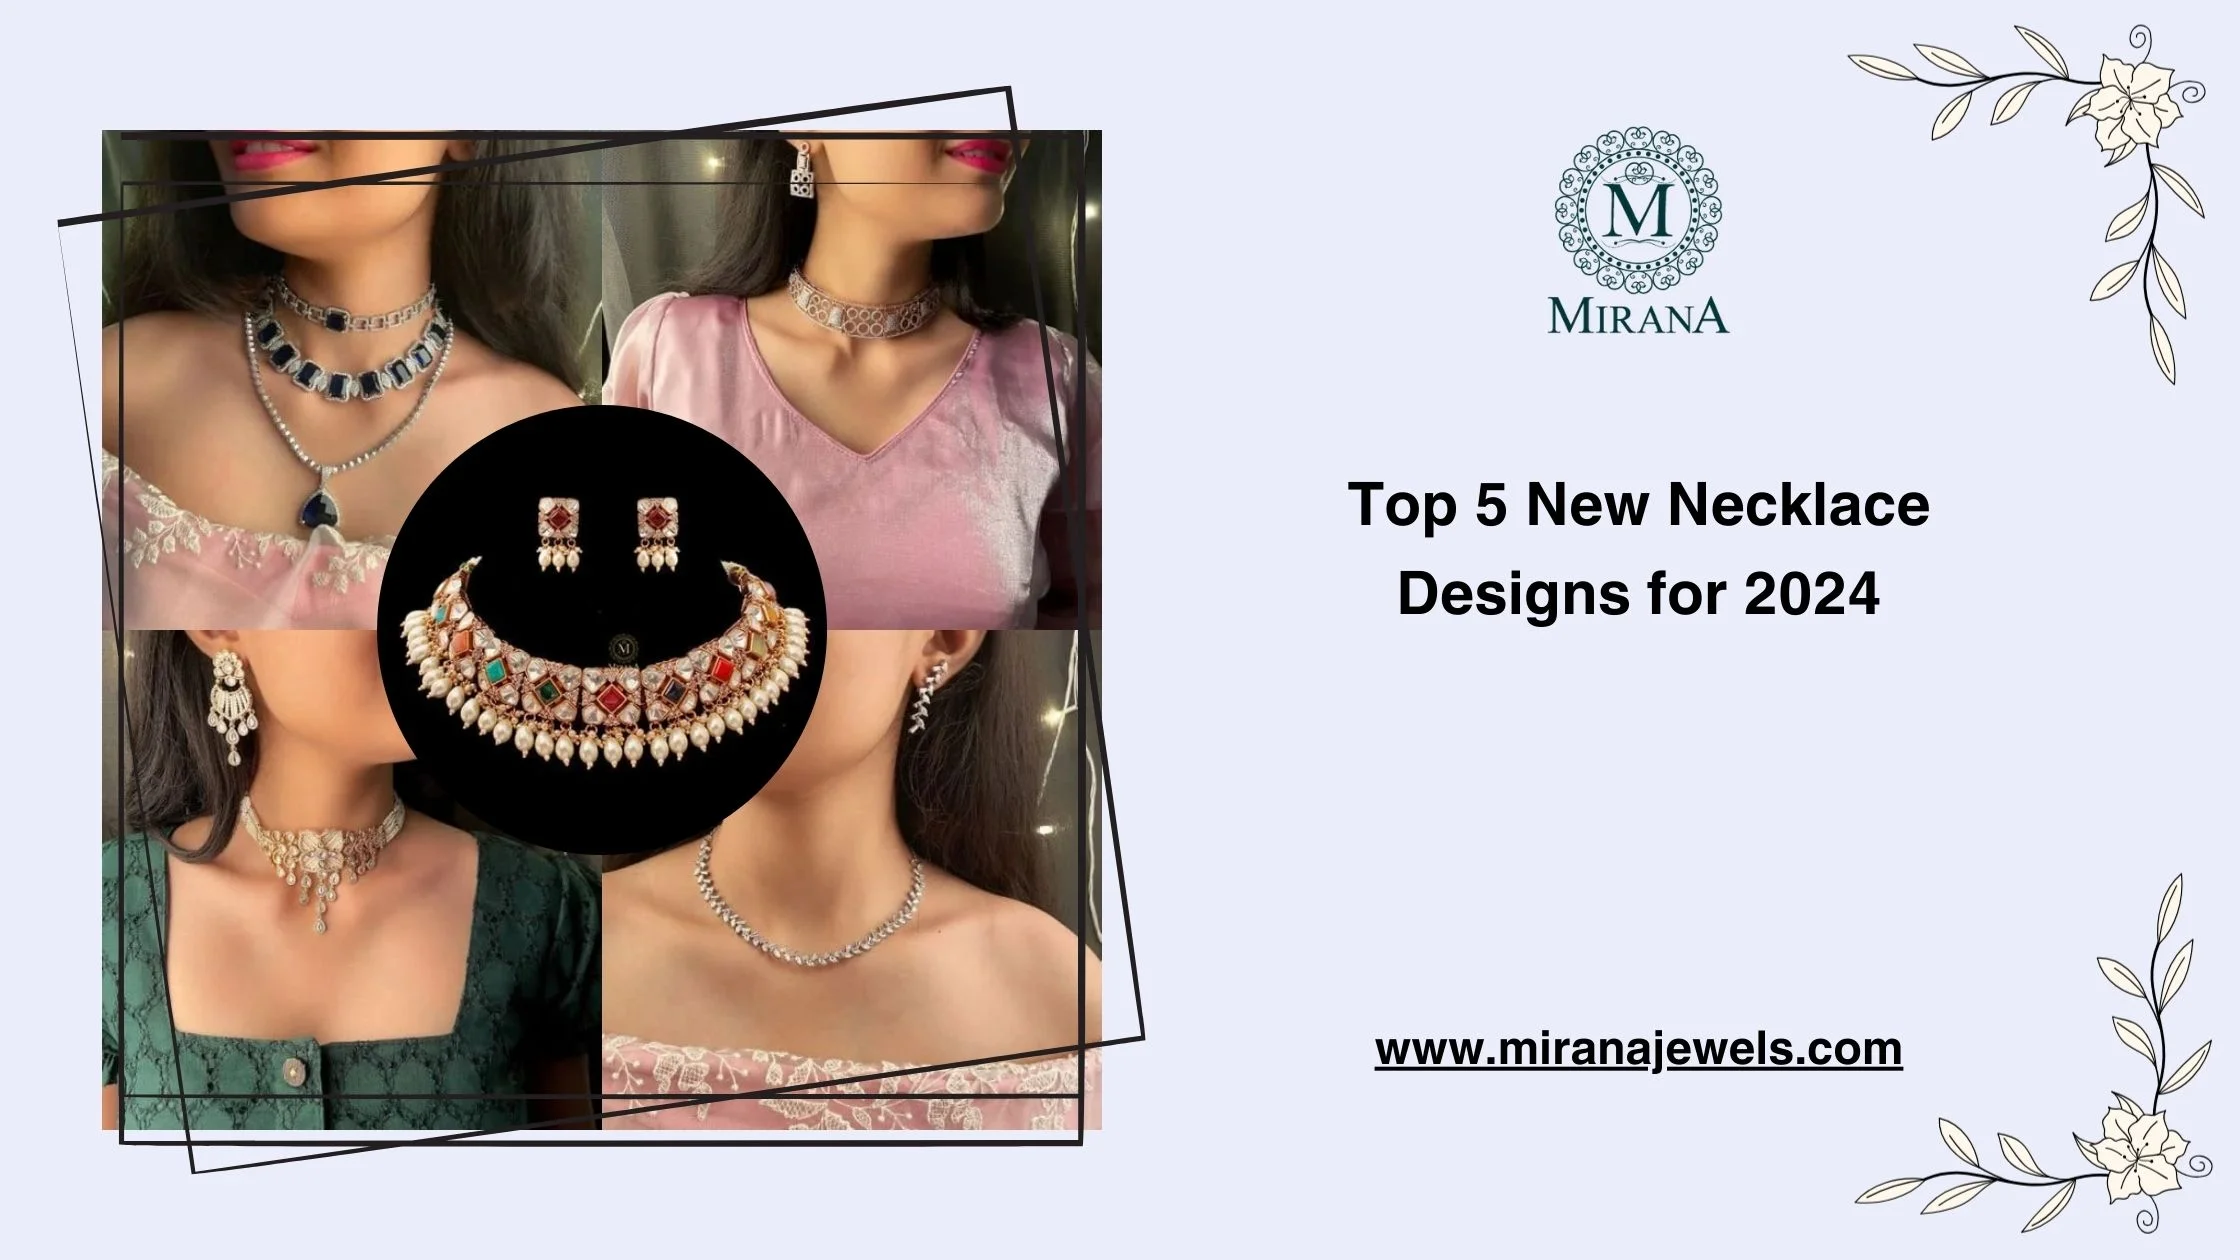 Top 5 New Necklace Designs for 2024